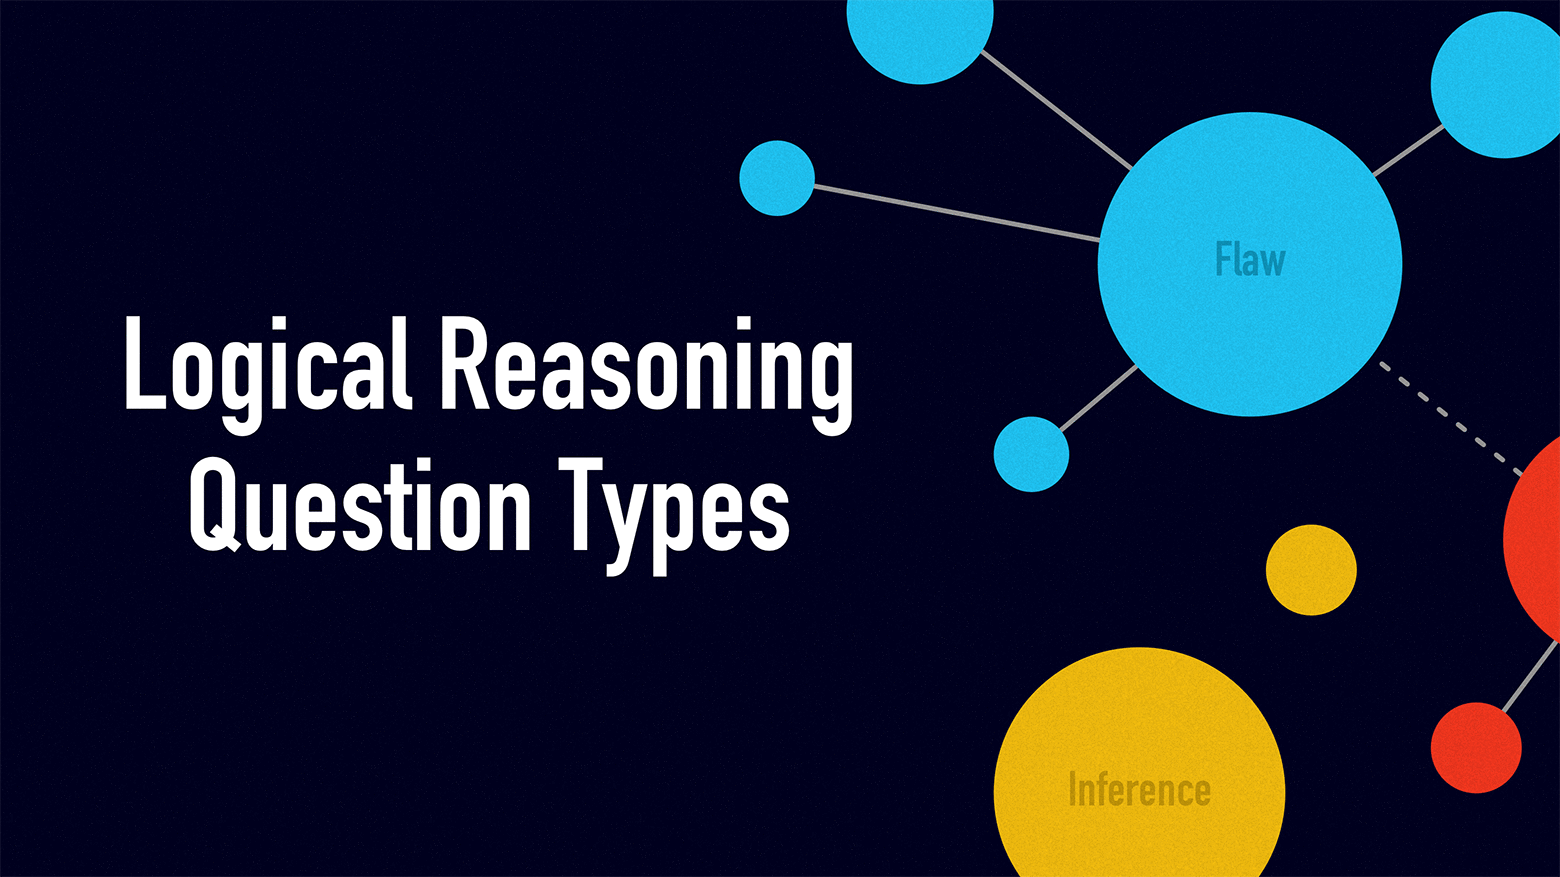 Logical Reasoning Question Types